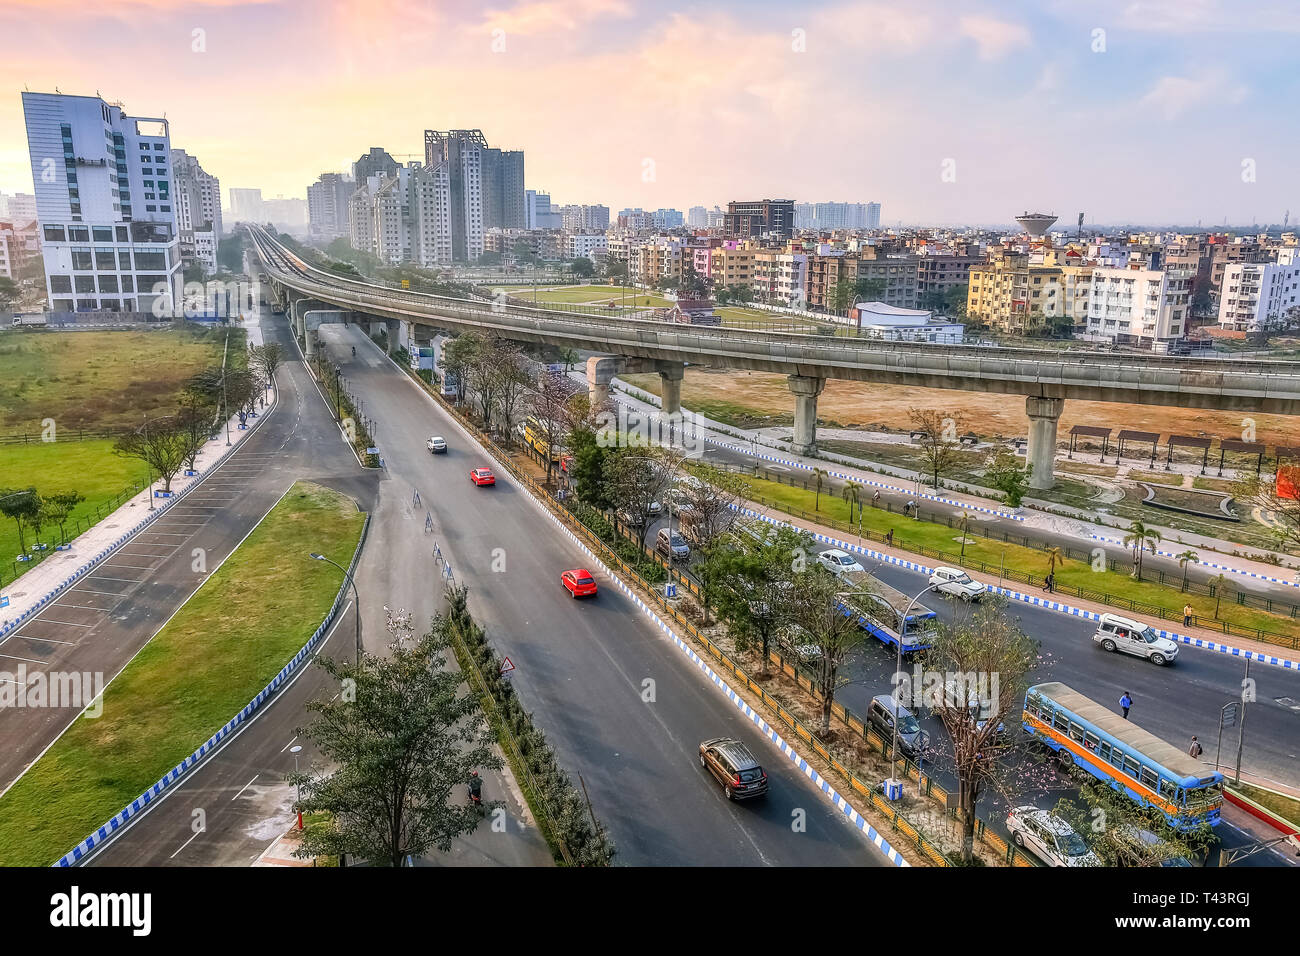 Indian city aerial view with highway road residential and commercial buildings with view of over bridge and city traffic at sunset Stock Photo